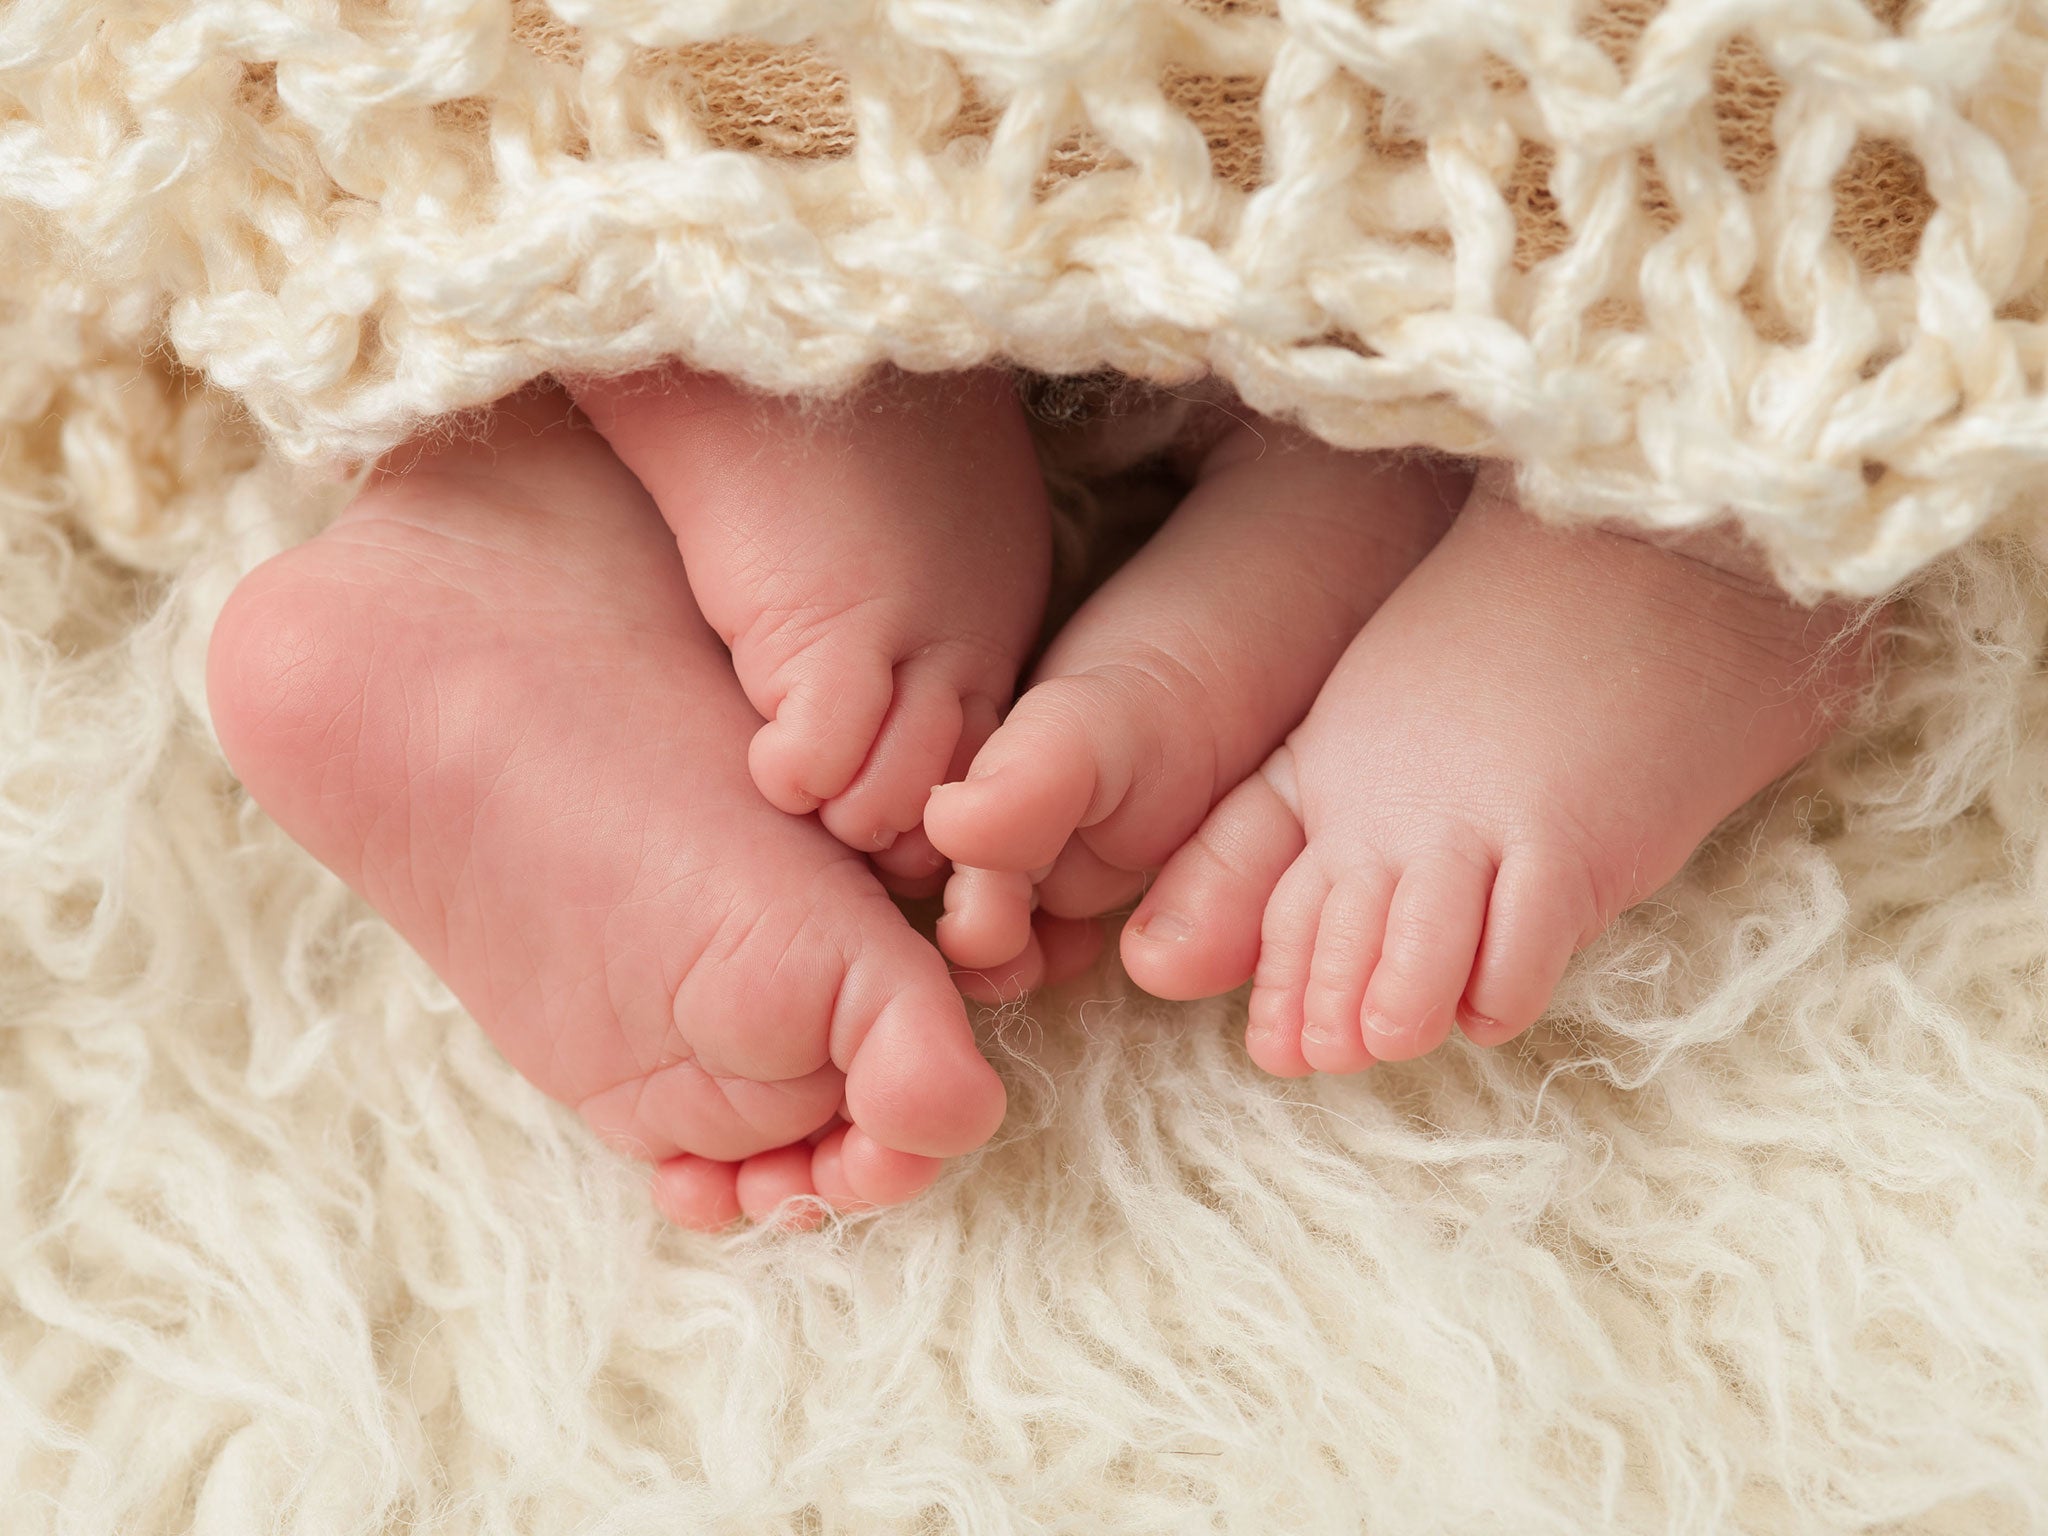 Germs in fur were found to help babies’ immune systems